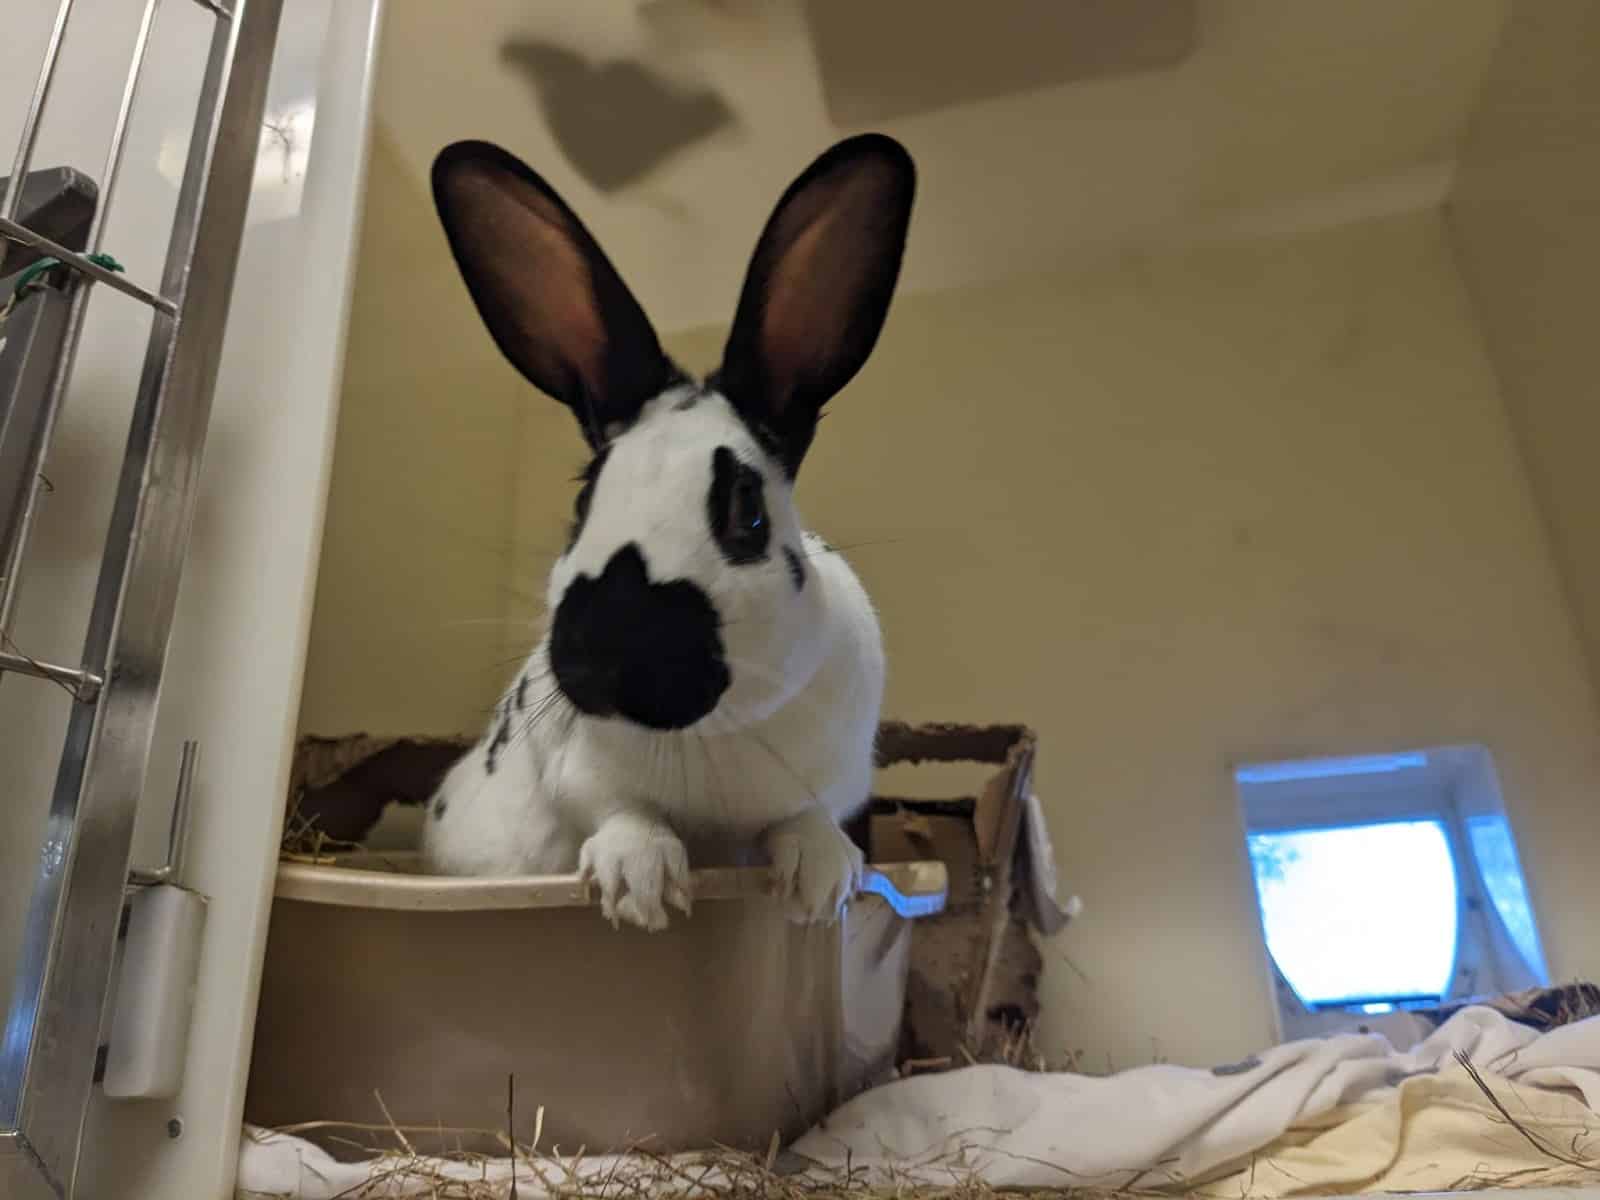 Rescue rabbits hop-ing for a home to call their own – can you help?